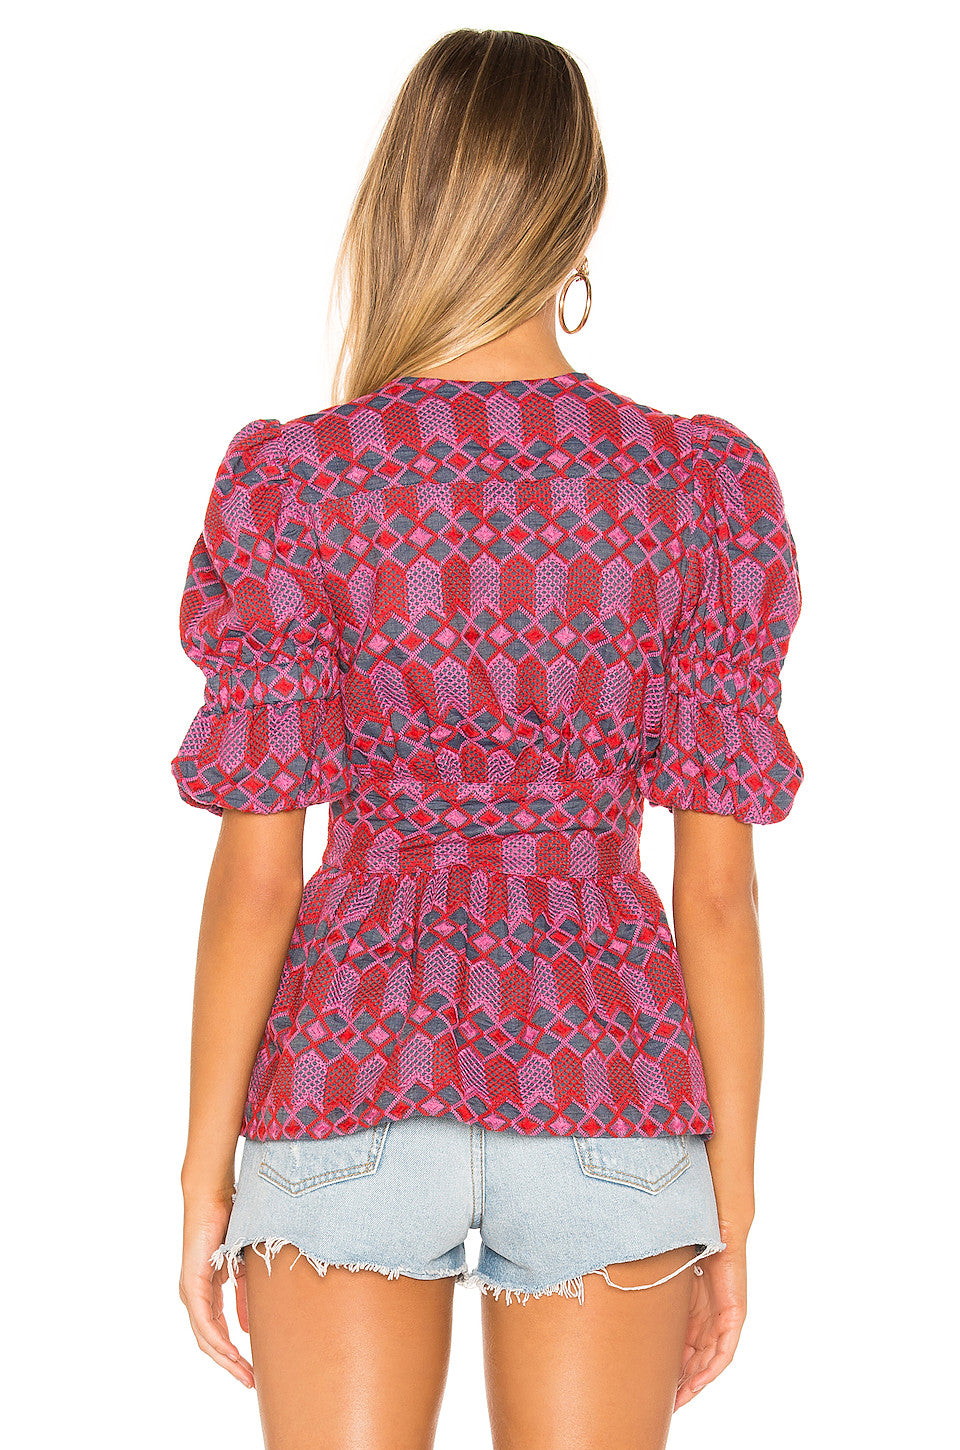 Wilson Embroidered Top in PINK MULTI